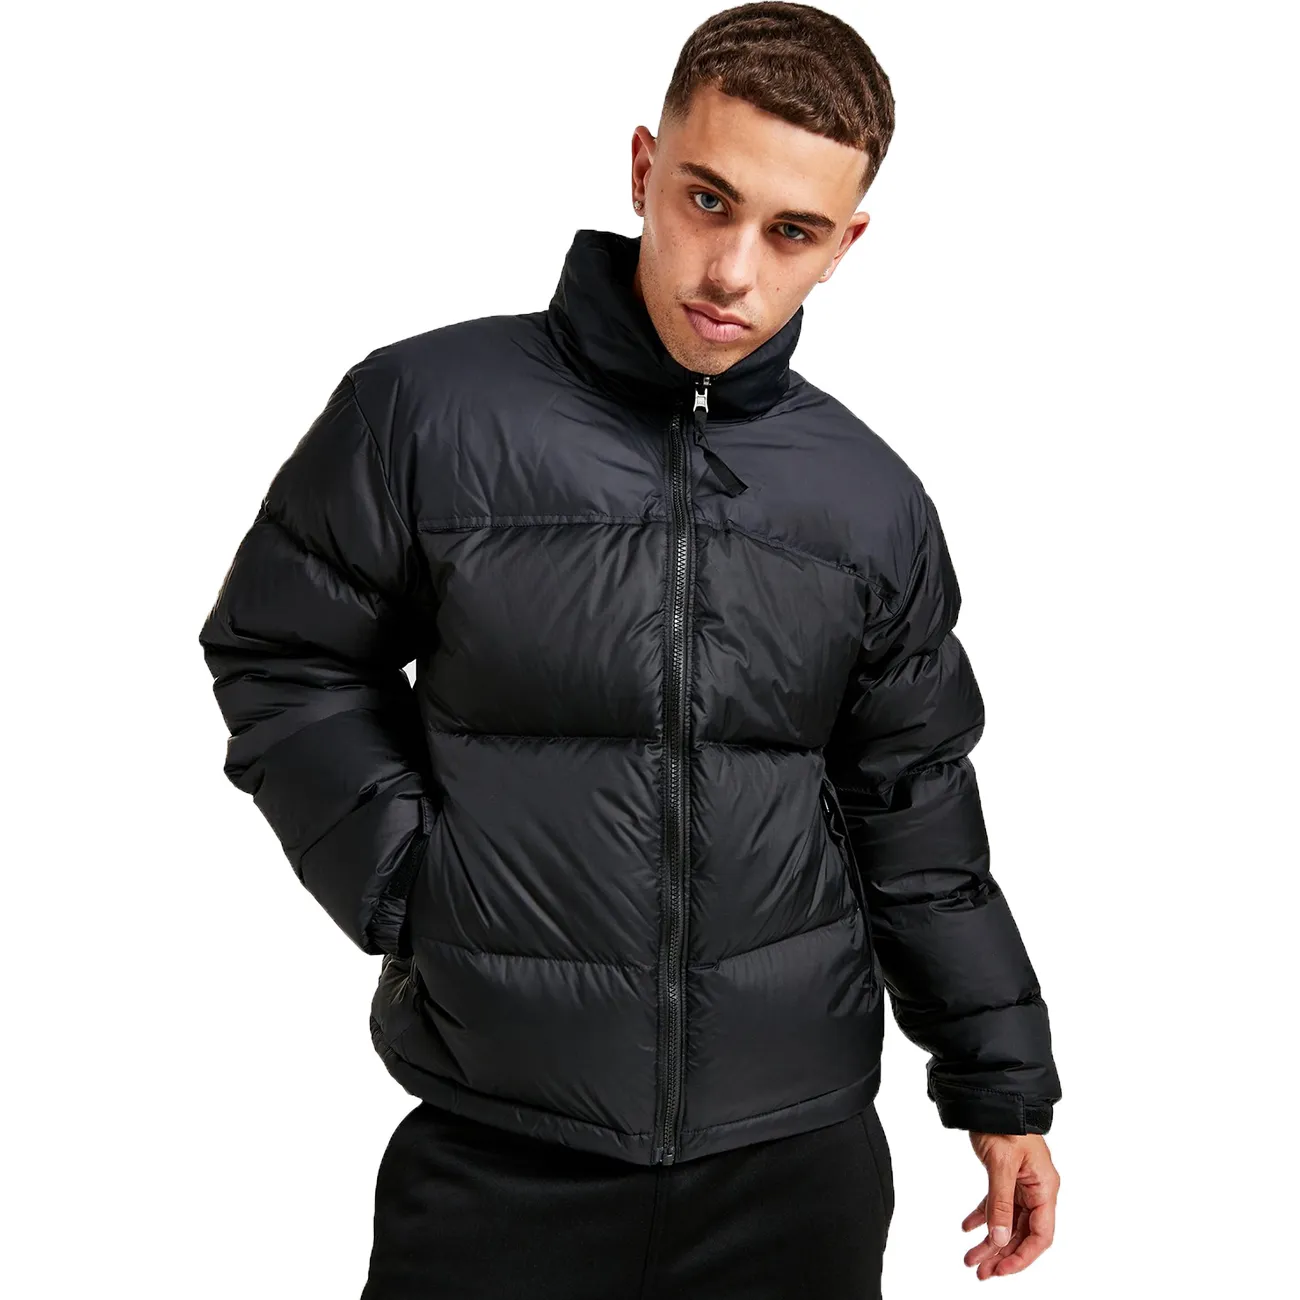 Top Quality Fashionable Winter Wear Down Puffer Hooded Jacket For Men black Puffer Jackets Best Quality quilted puffer jackets